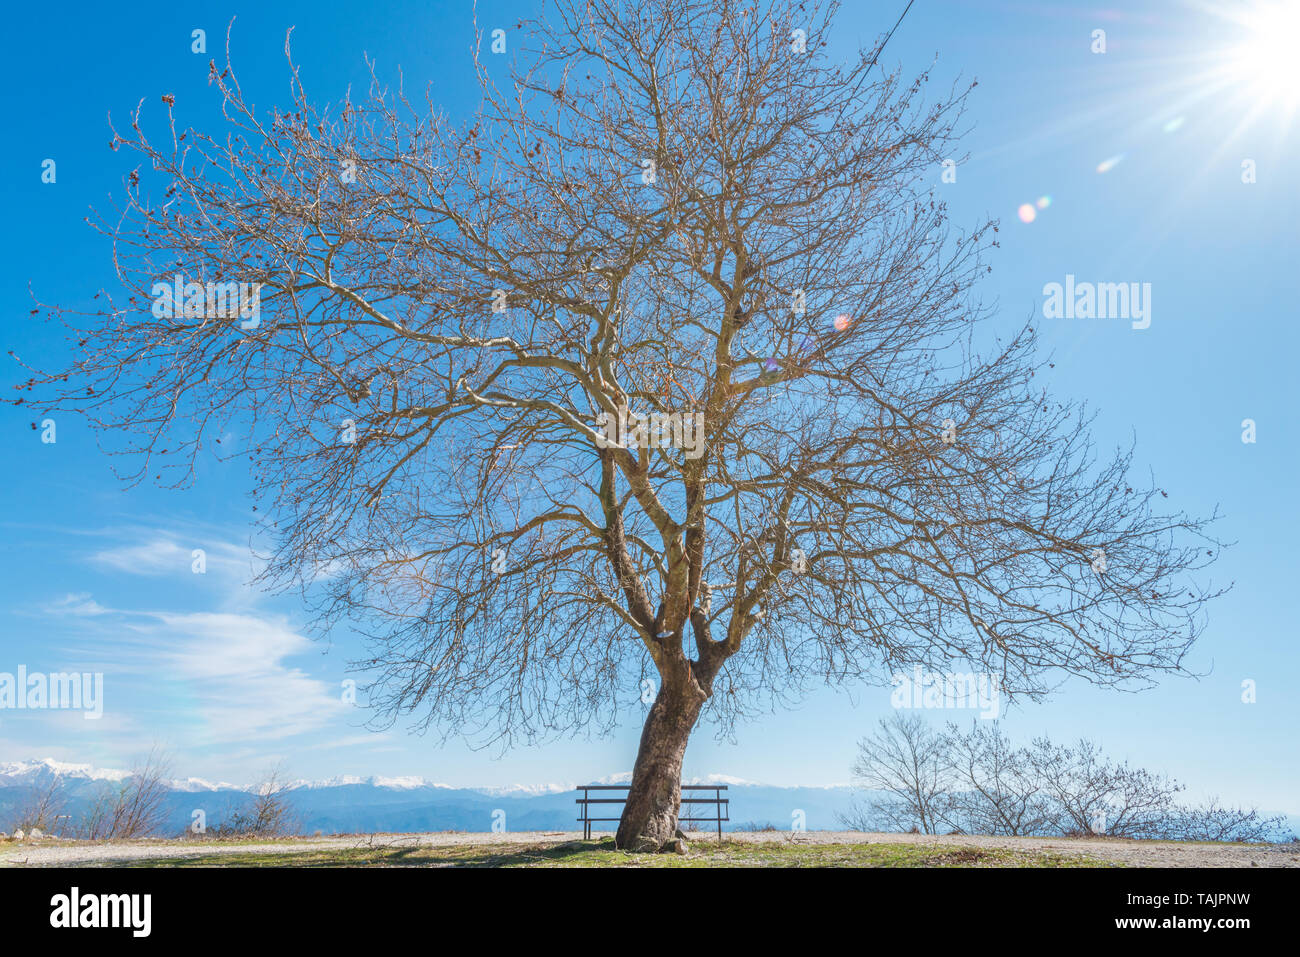 Big dead leafless tree with lone bench, solitary tree looking at a snowcapped mountain range in Greece. Stock Photo